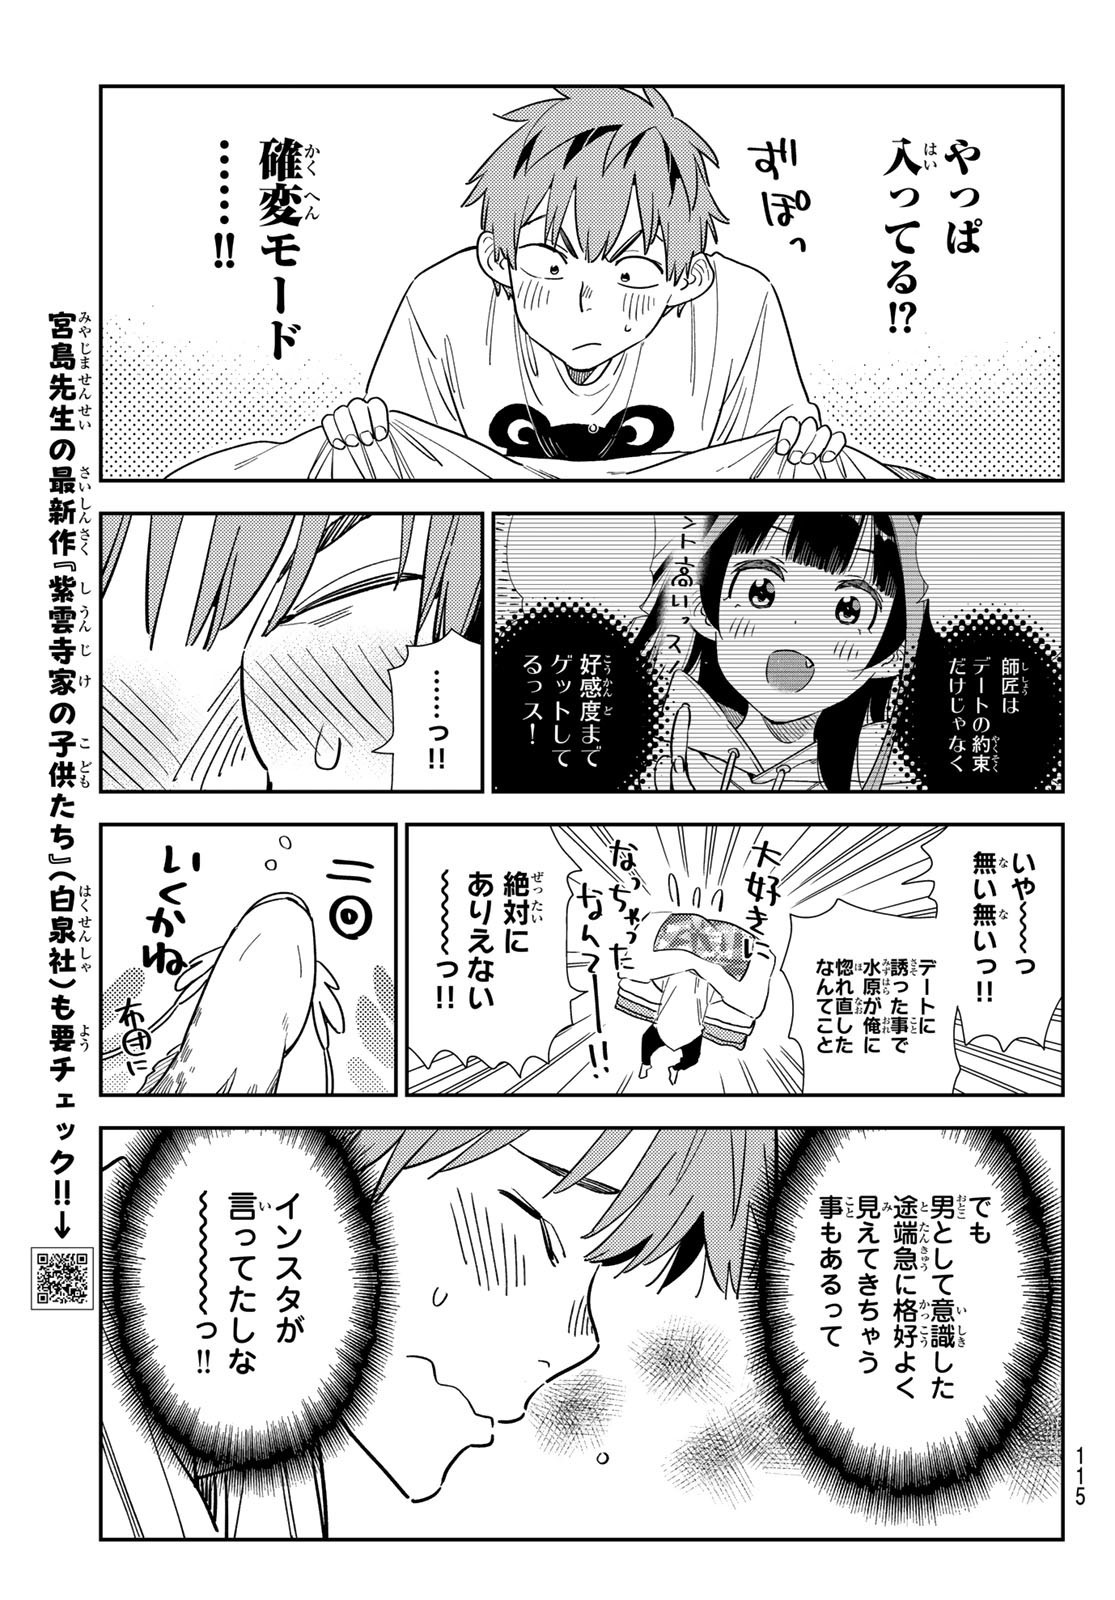 Weekly Shōnen Magazine - 週刊少年マガジン - Chapter 2024-23 - Page 113